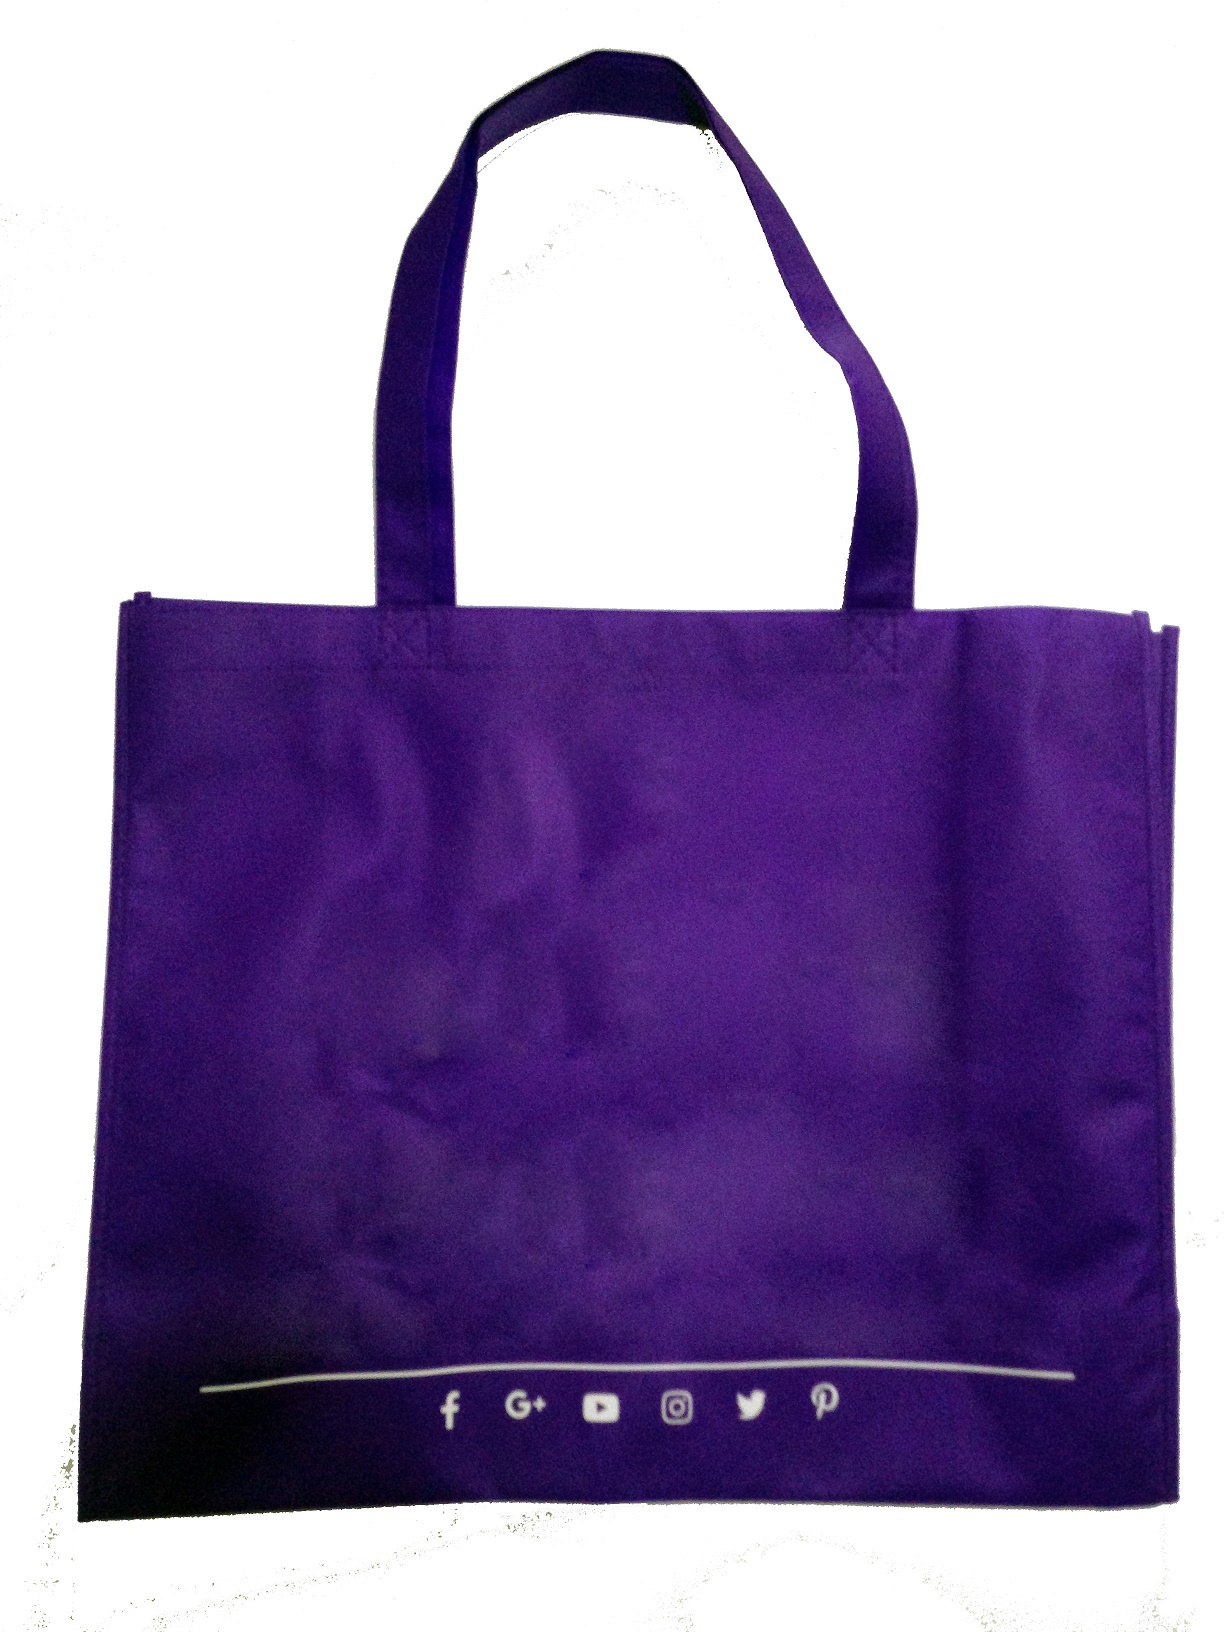 Promotional Bags Custom Printed with Your Logo